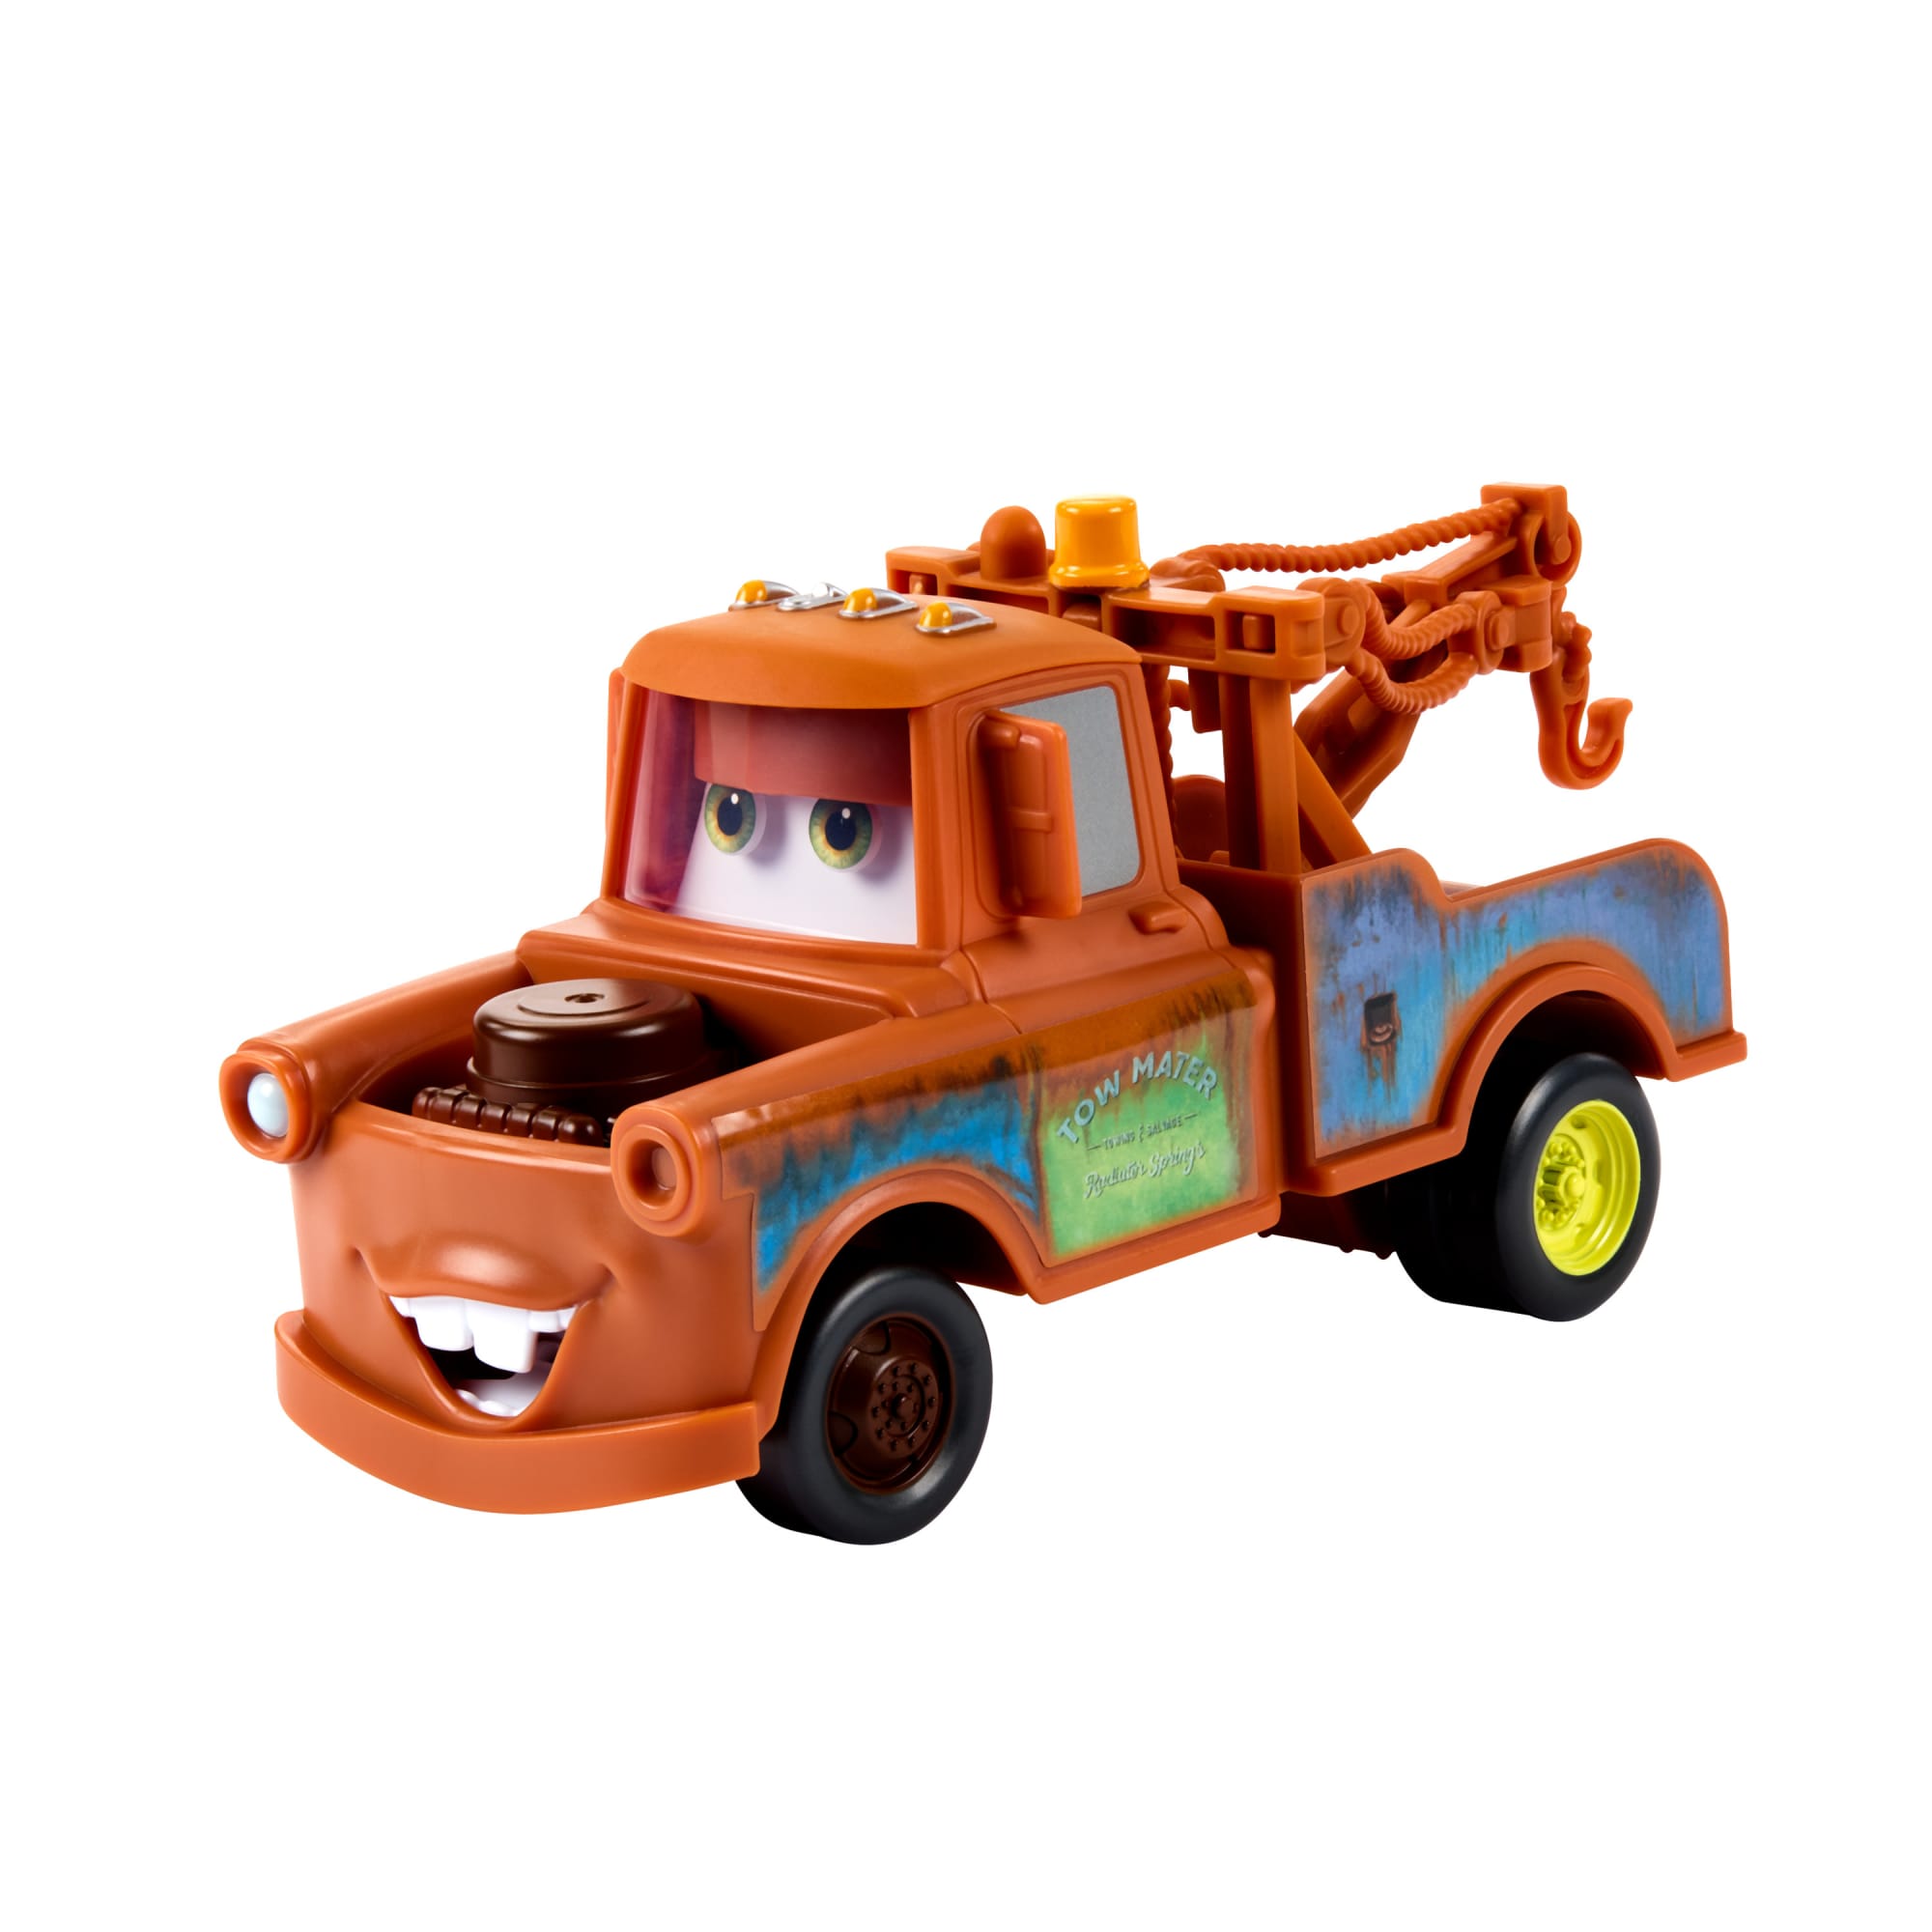 Disney and Pixar Cars Moving Moments Mater